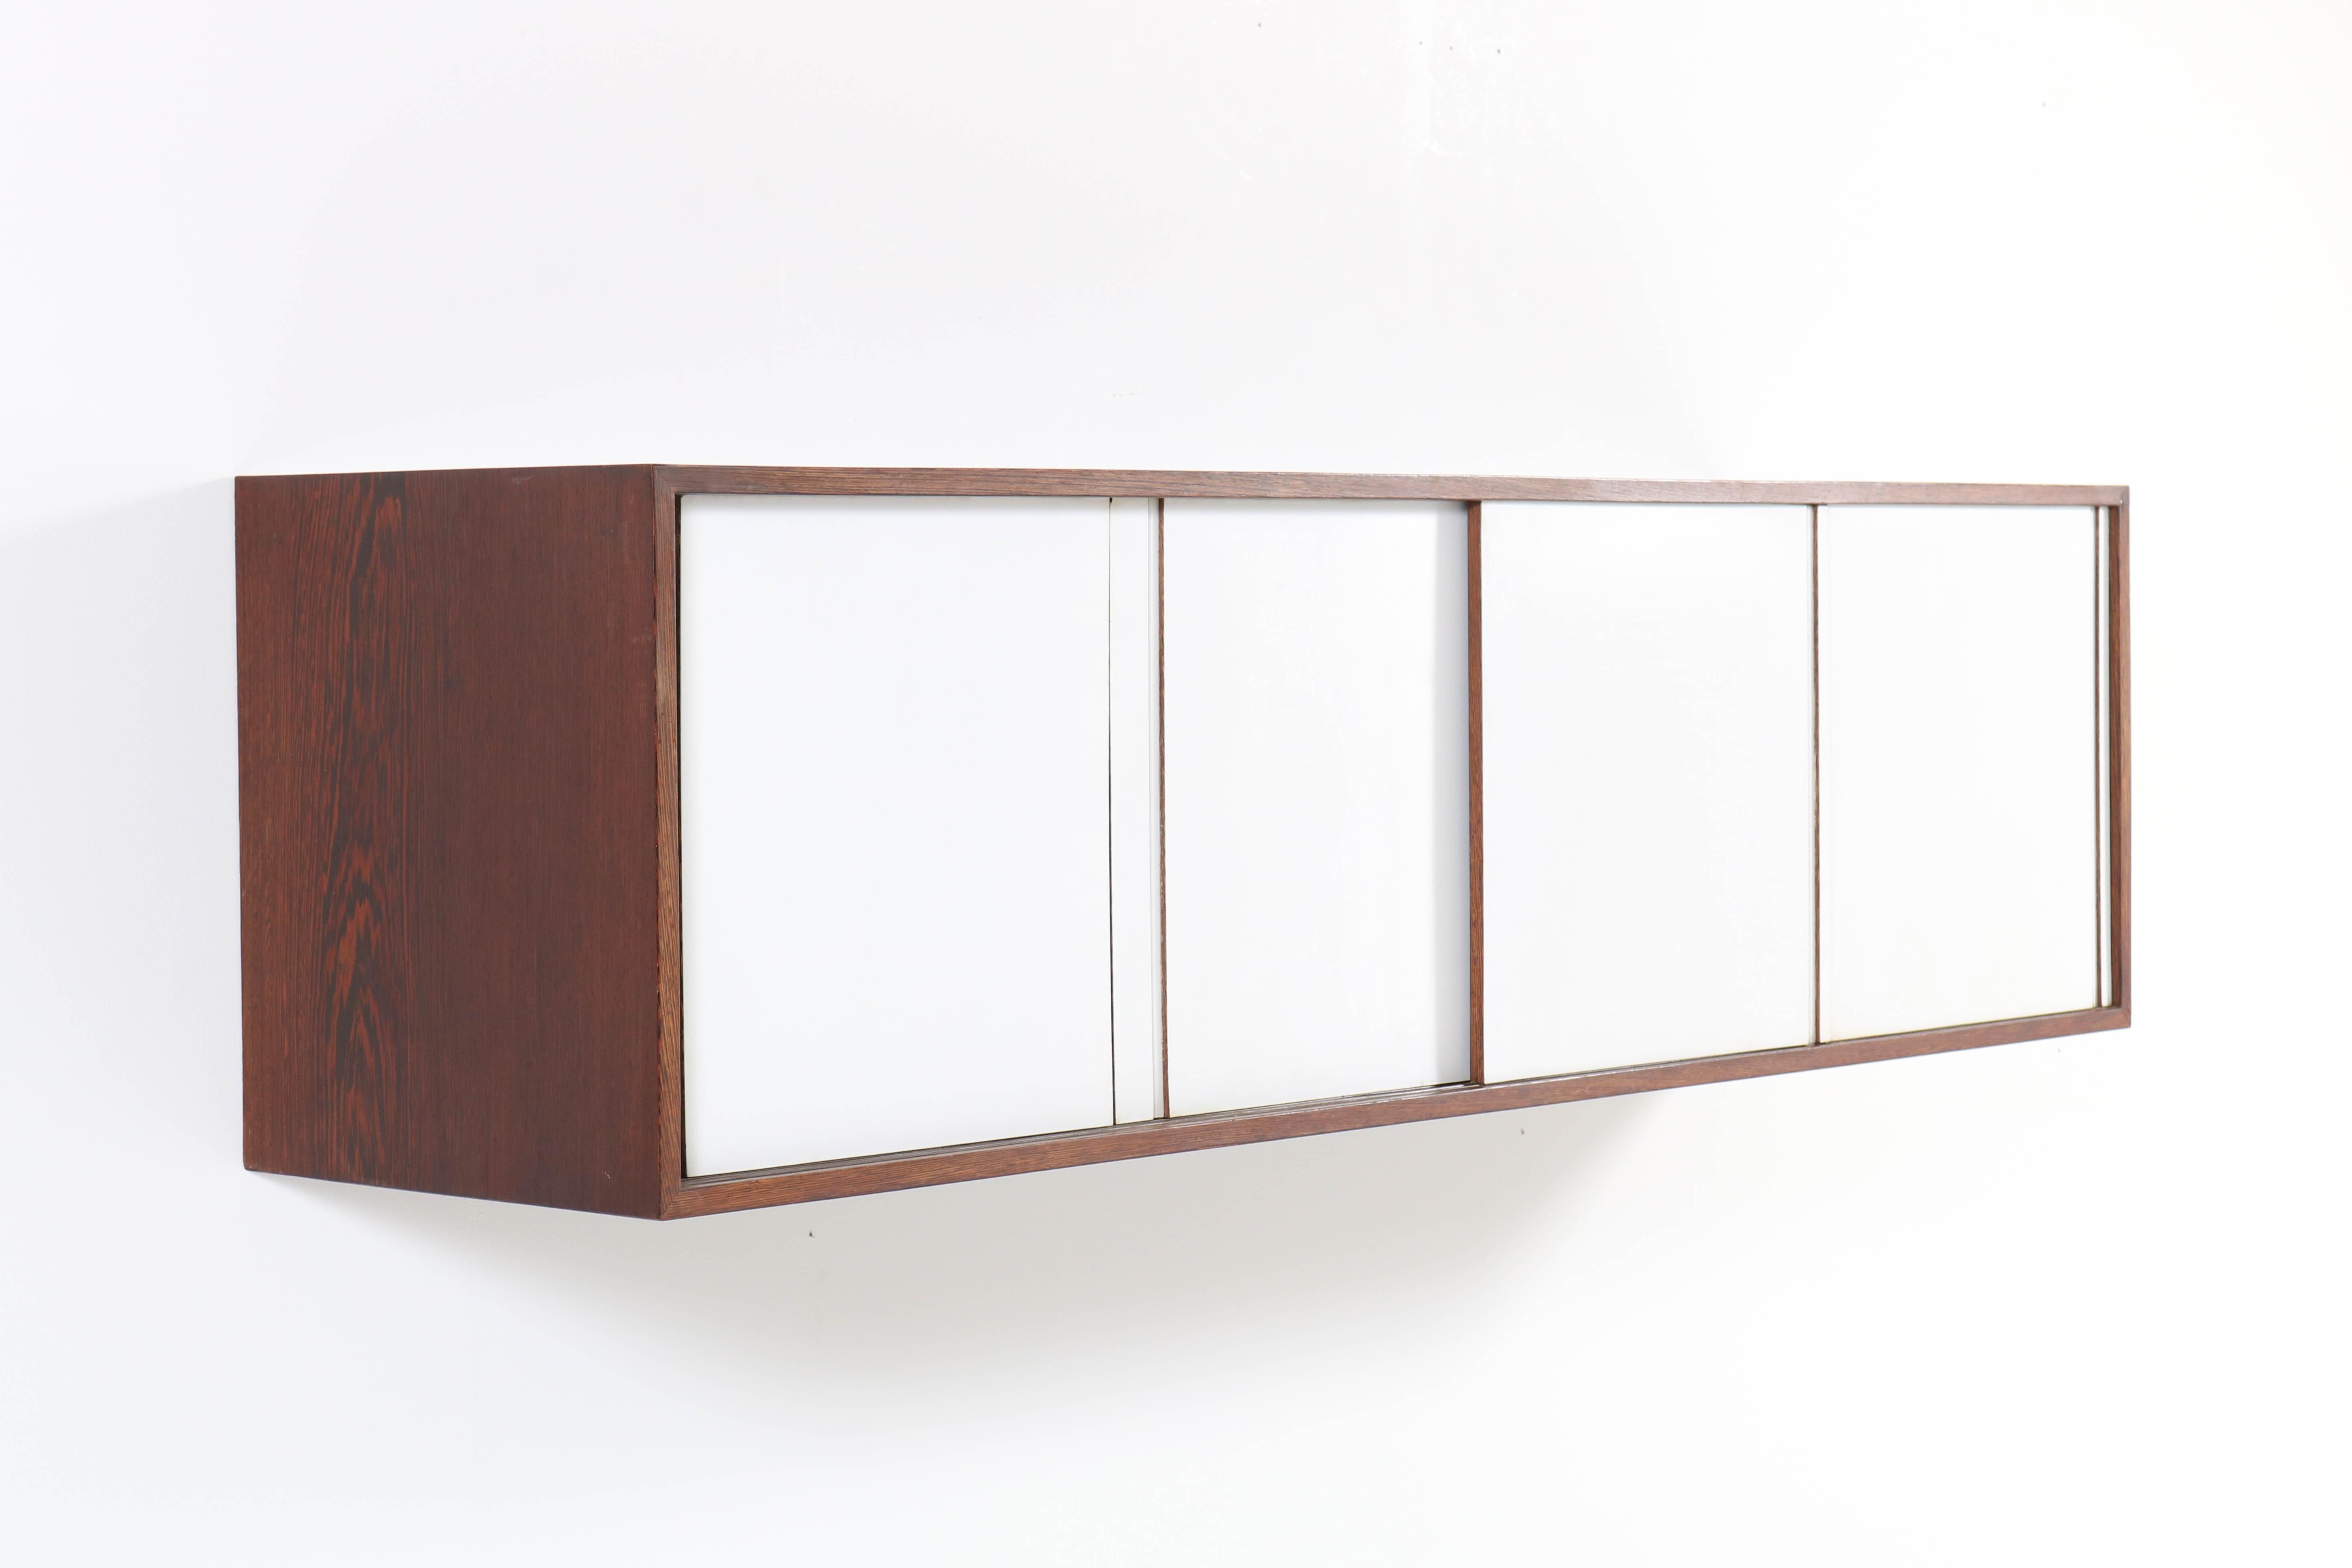 Stunning and rare Mid-Century Modern floating sideboard or credenza.
Design by Martin Visser for 't Spectrum.
Striking Dutch design from the 1960s.
Wengé with original lacquered sliding doors.
In good original condition with minor wear